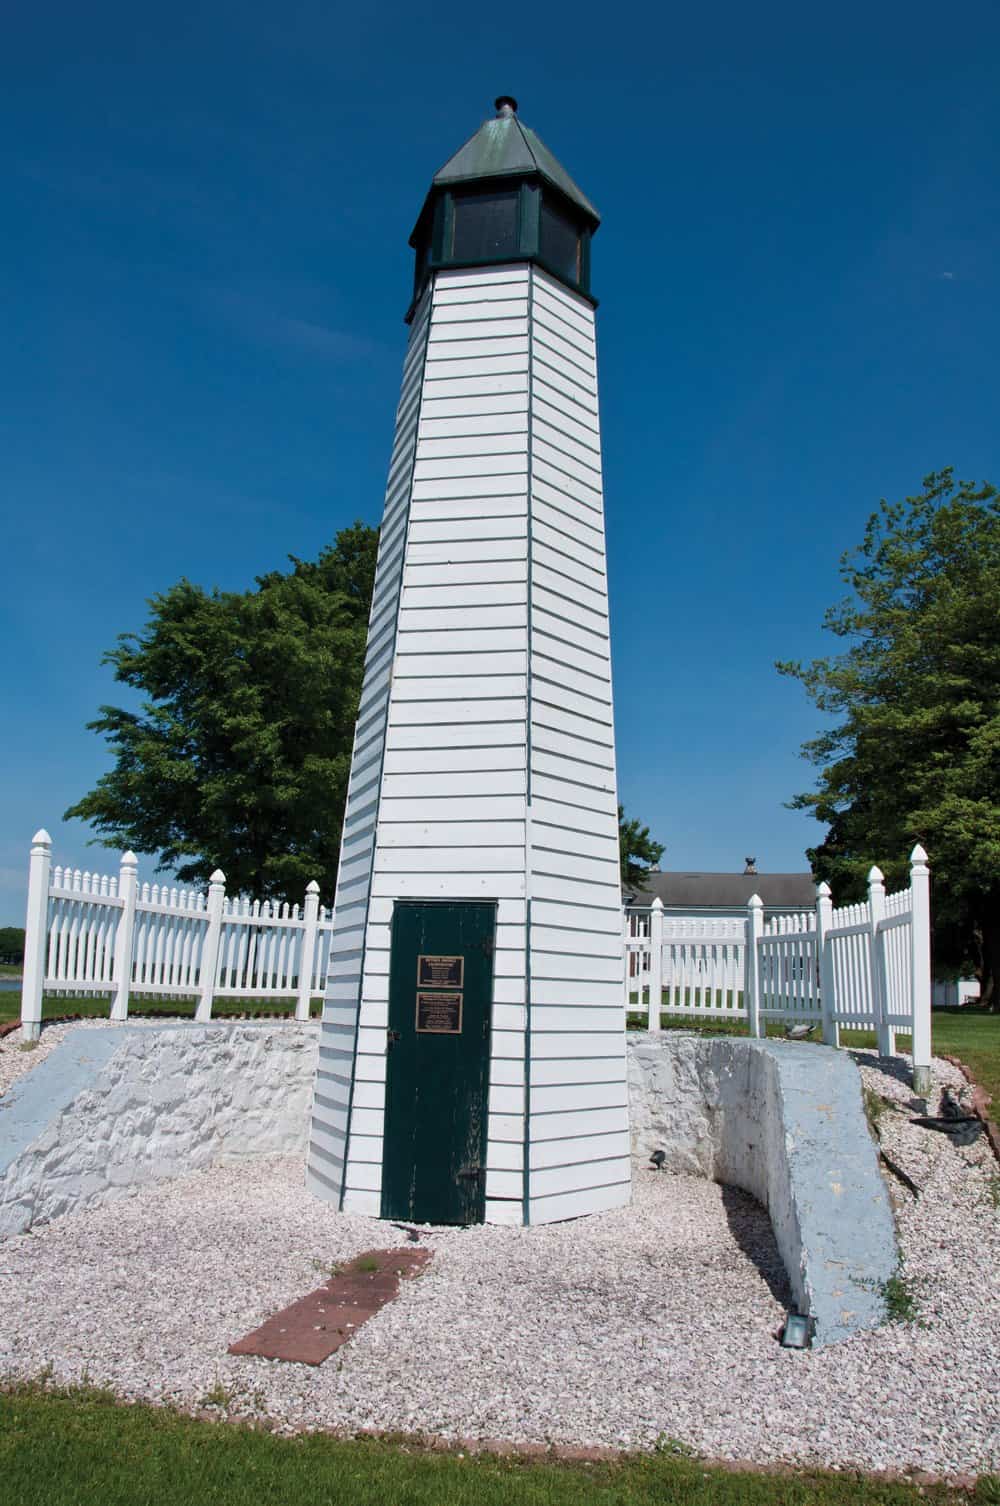  Bethel Bridge Lighthouse was one of the original markers along the canal.  photo   by: Chris Landers  